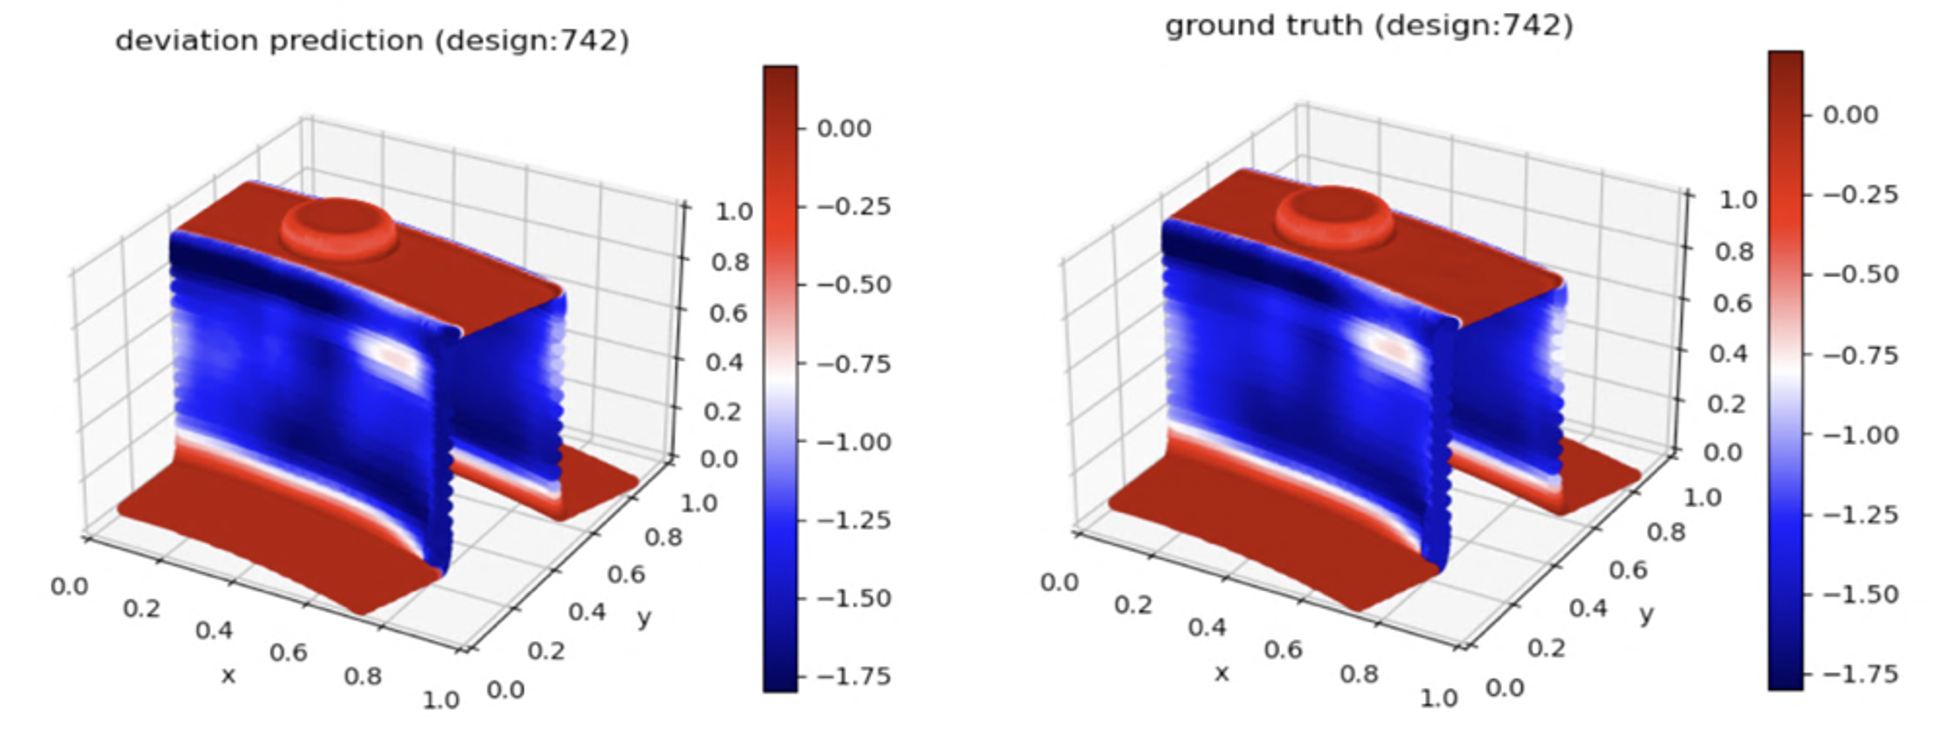 Prediction and ground truth for the deviation of each element of the Banana mesh.